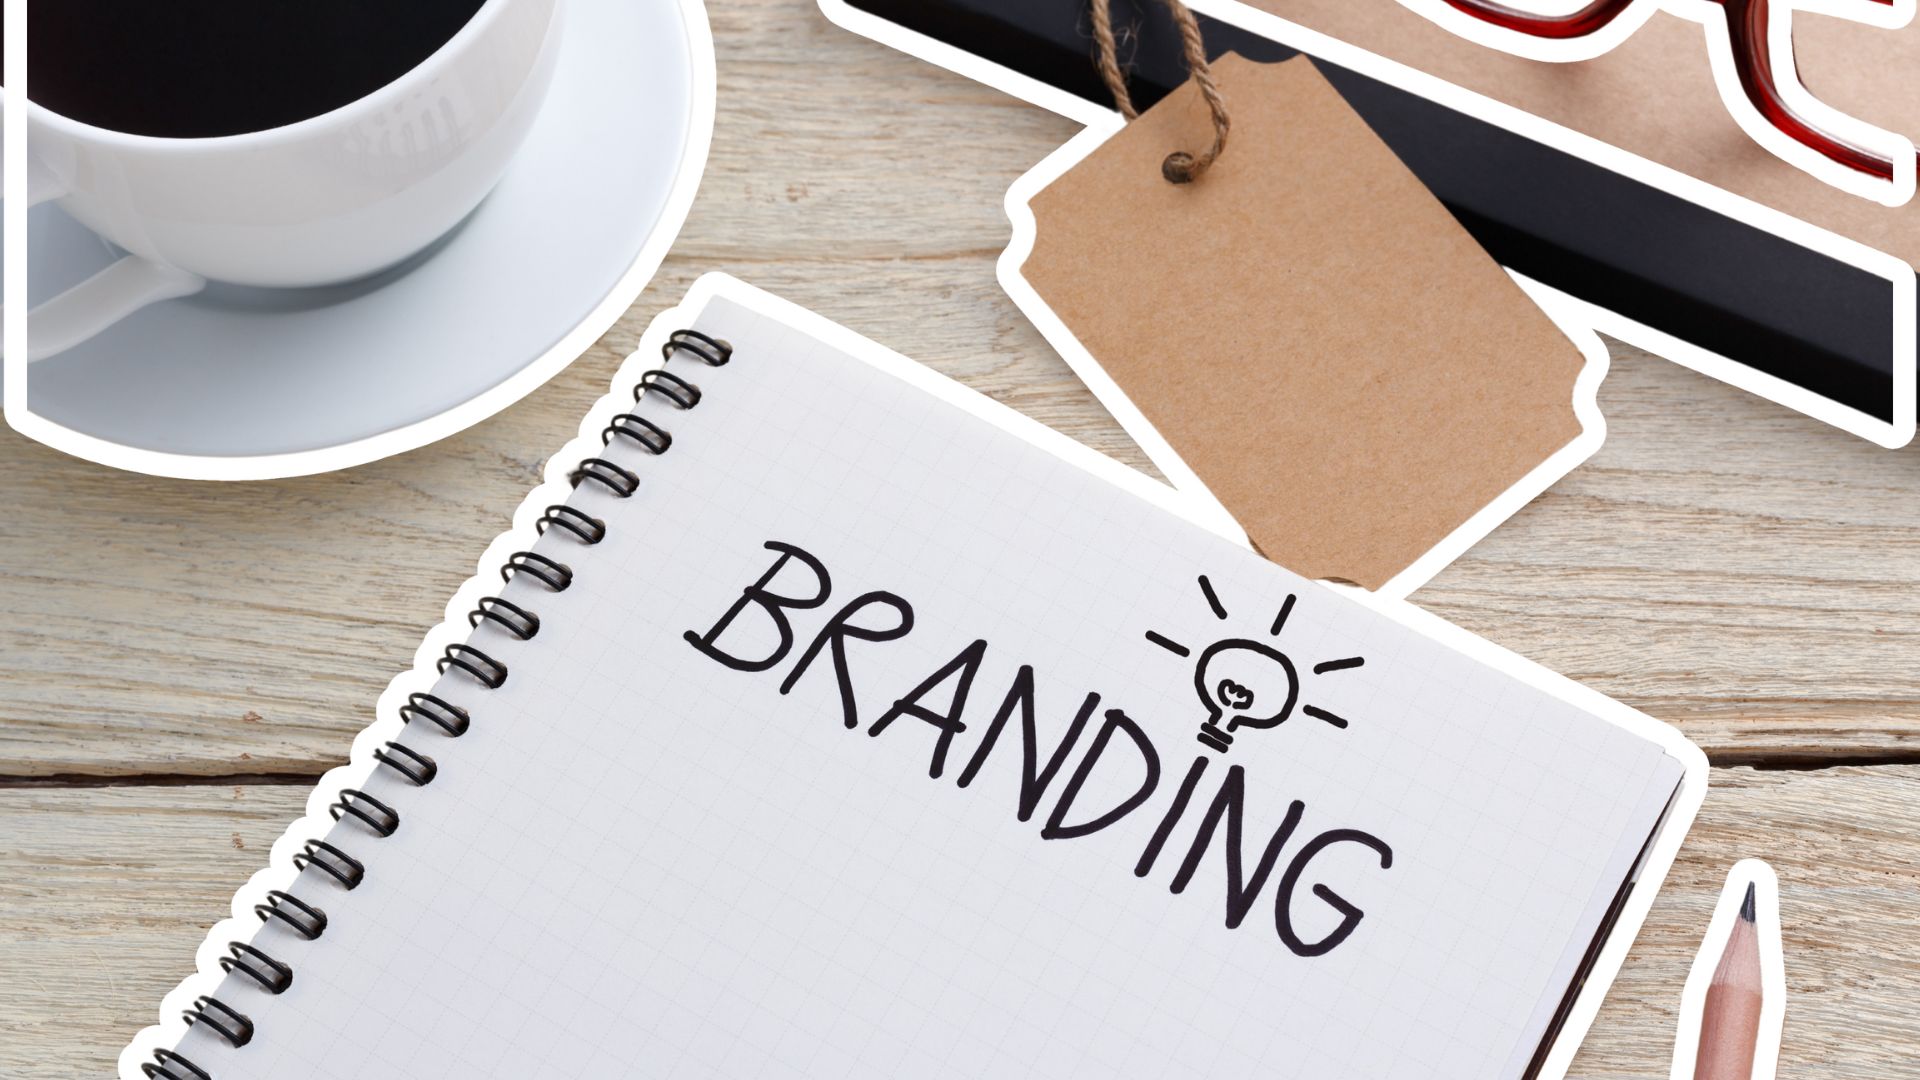 How Can Blending Words Enhance a Brand's Marketing Strategy?